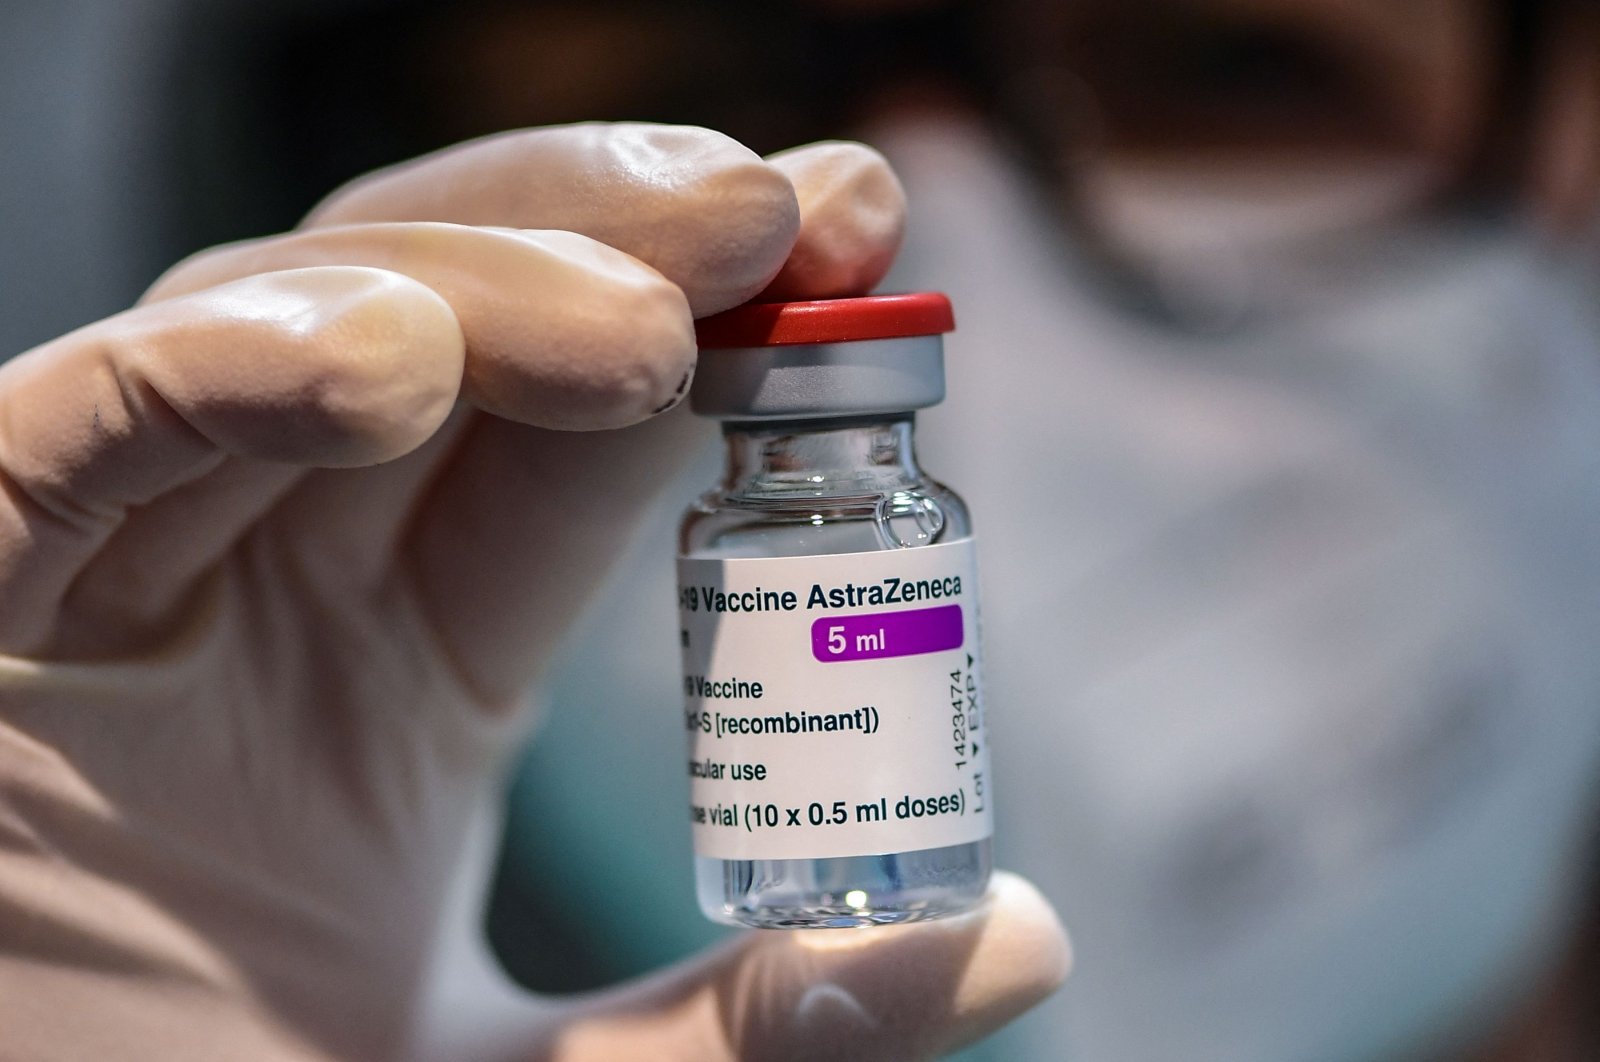 A medical worker holds a vial of the AstraZeneca/Oxford COVID-19 vaccine during a vaccination campaign at the National Museum of Science and Technology Leonardo Da Vinci, Milan, Italy, March 9, 2021. (AFP Photo)